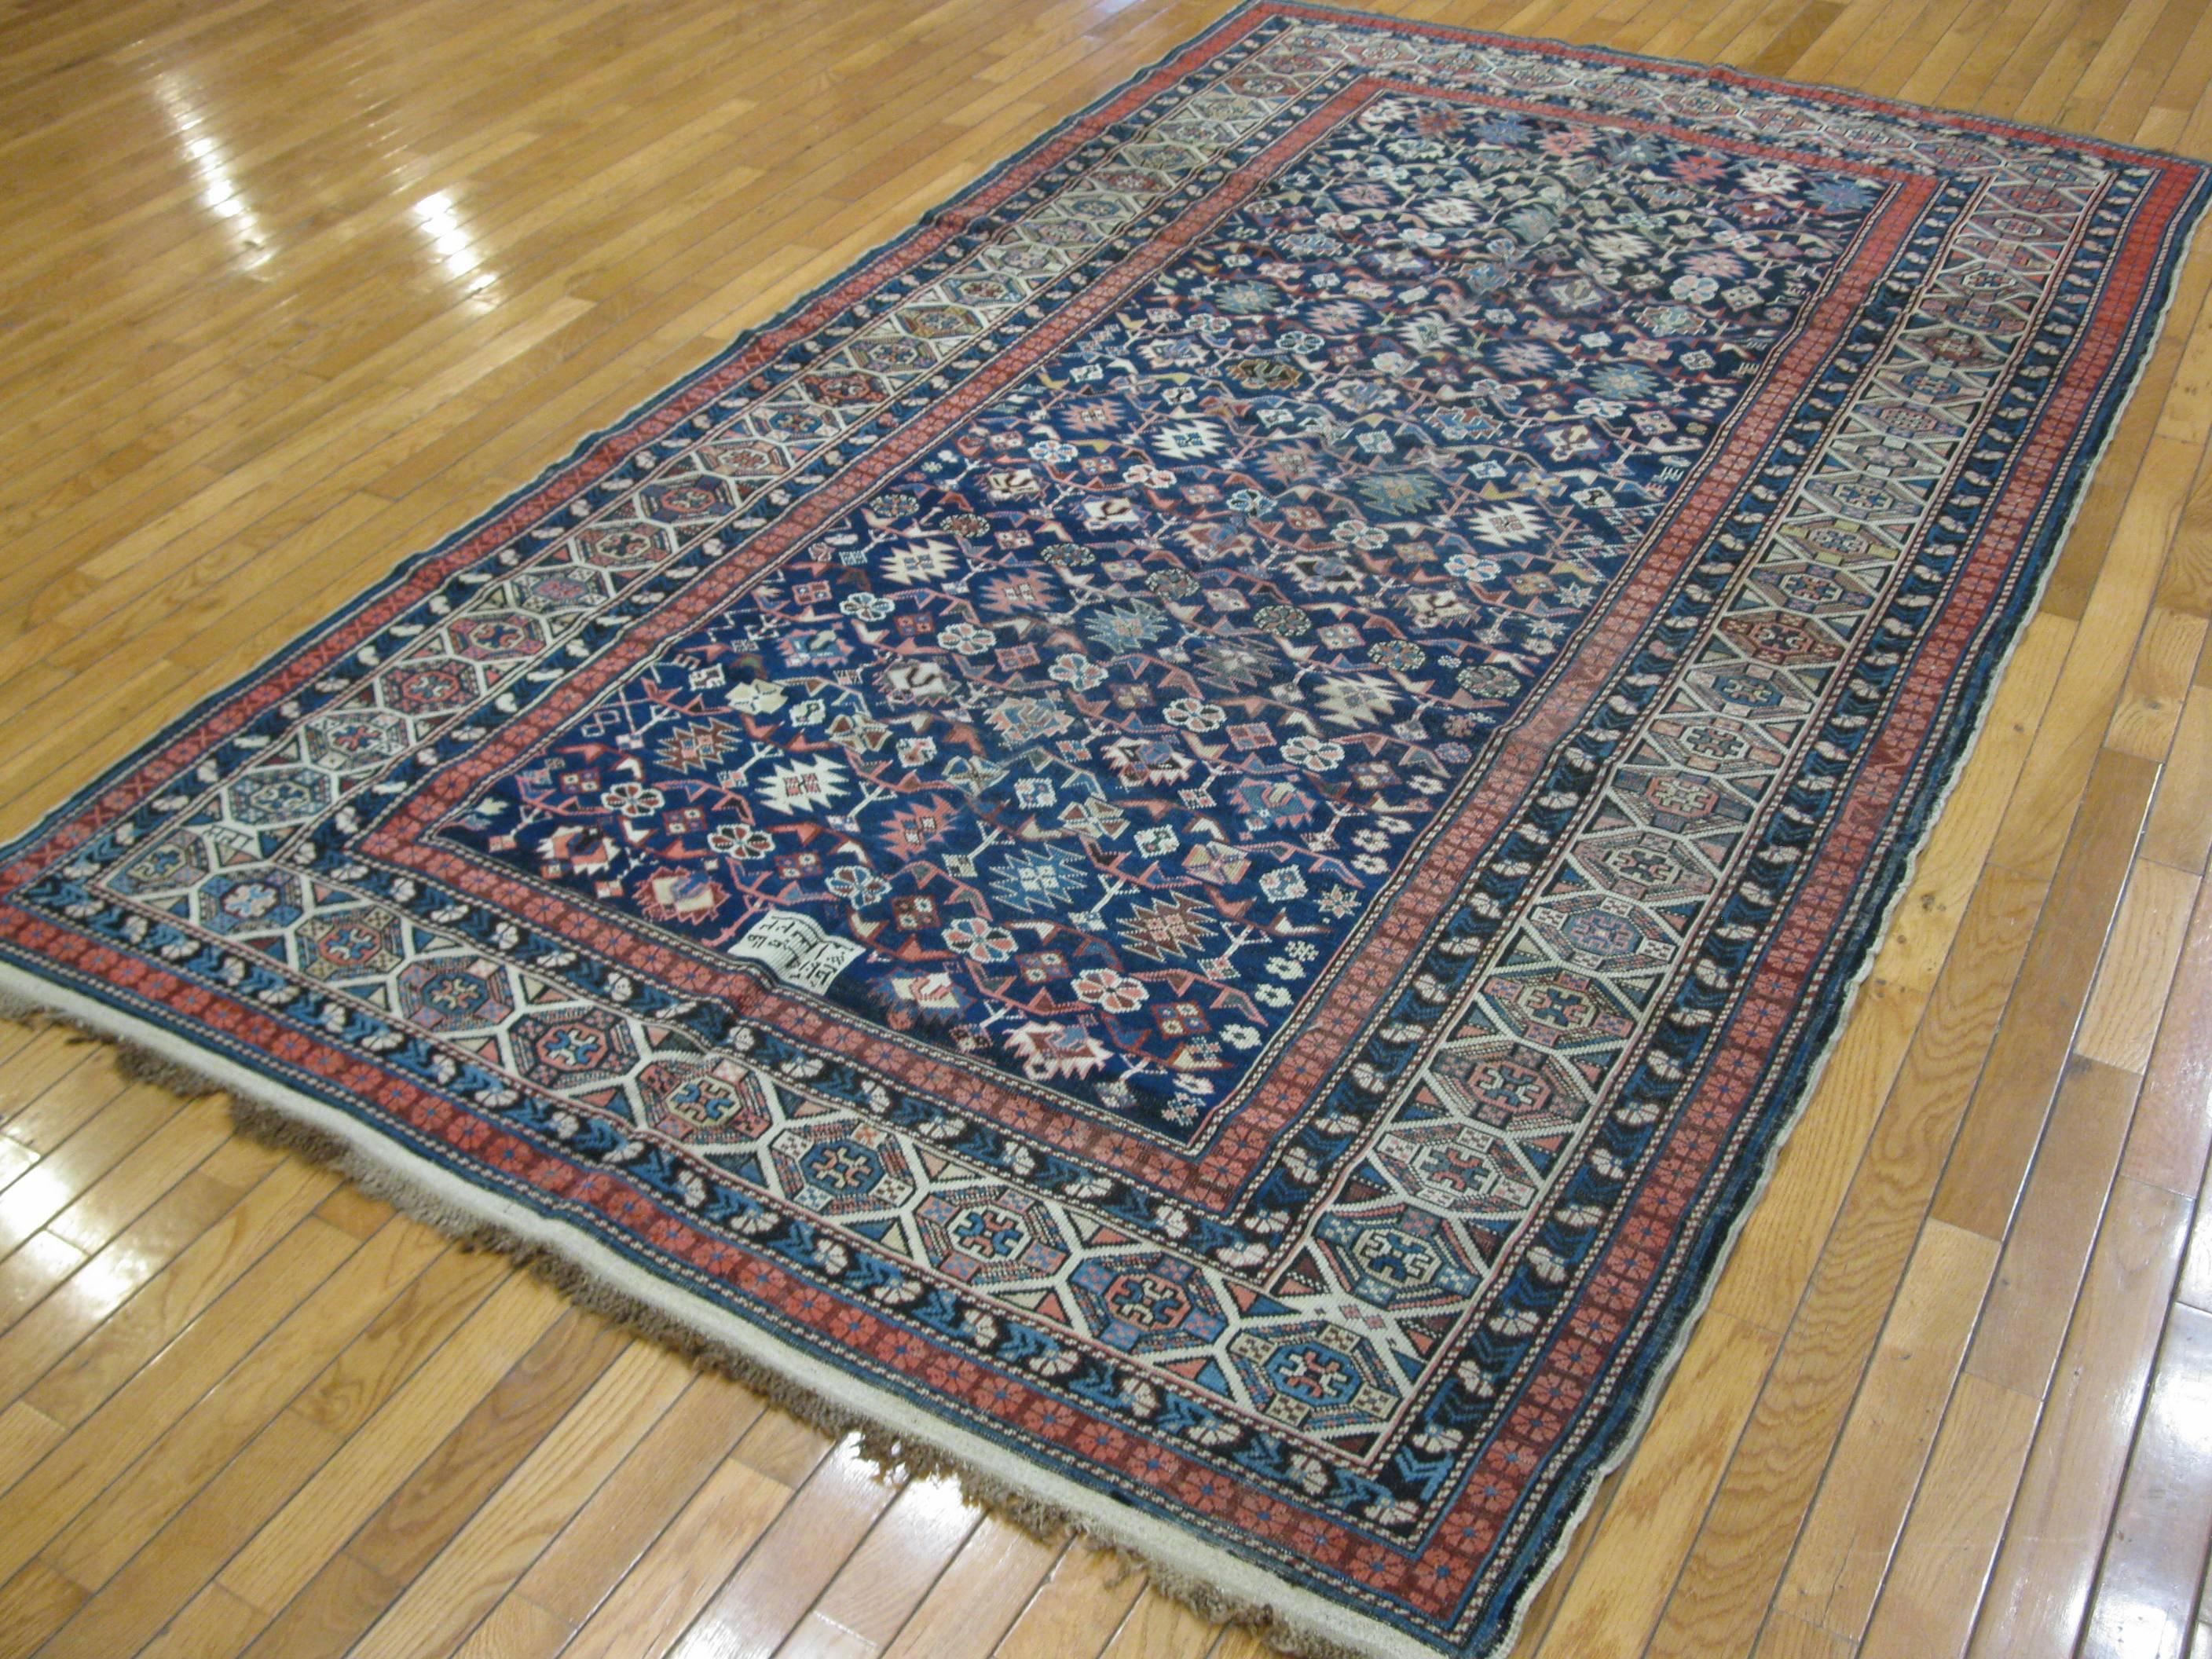 19th Century Antique Hand-Knotted Wool Caucasian Shirvan Rug